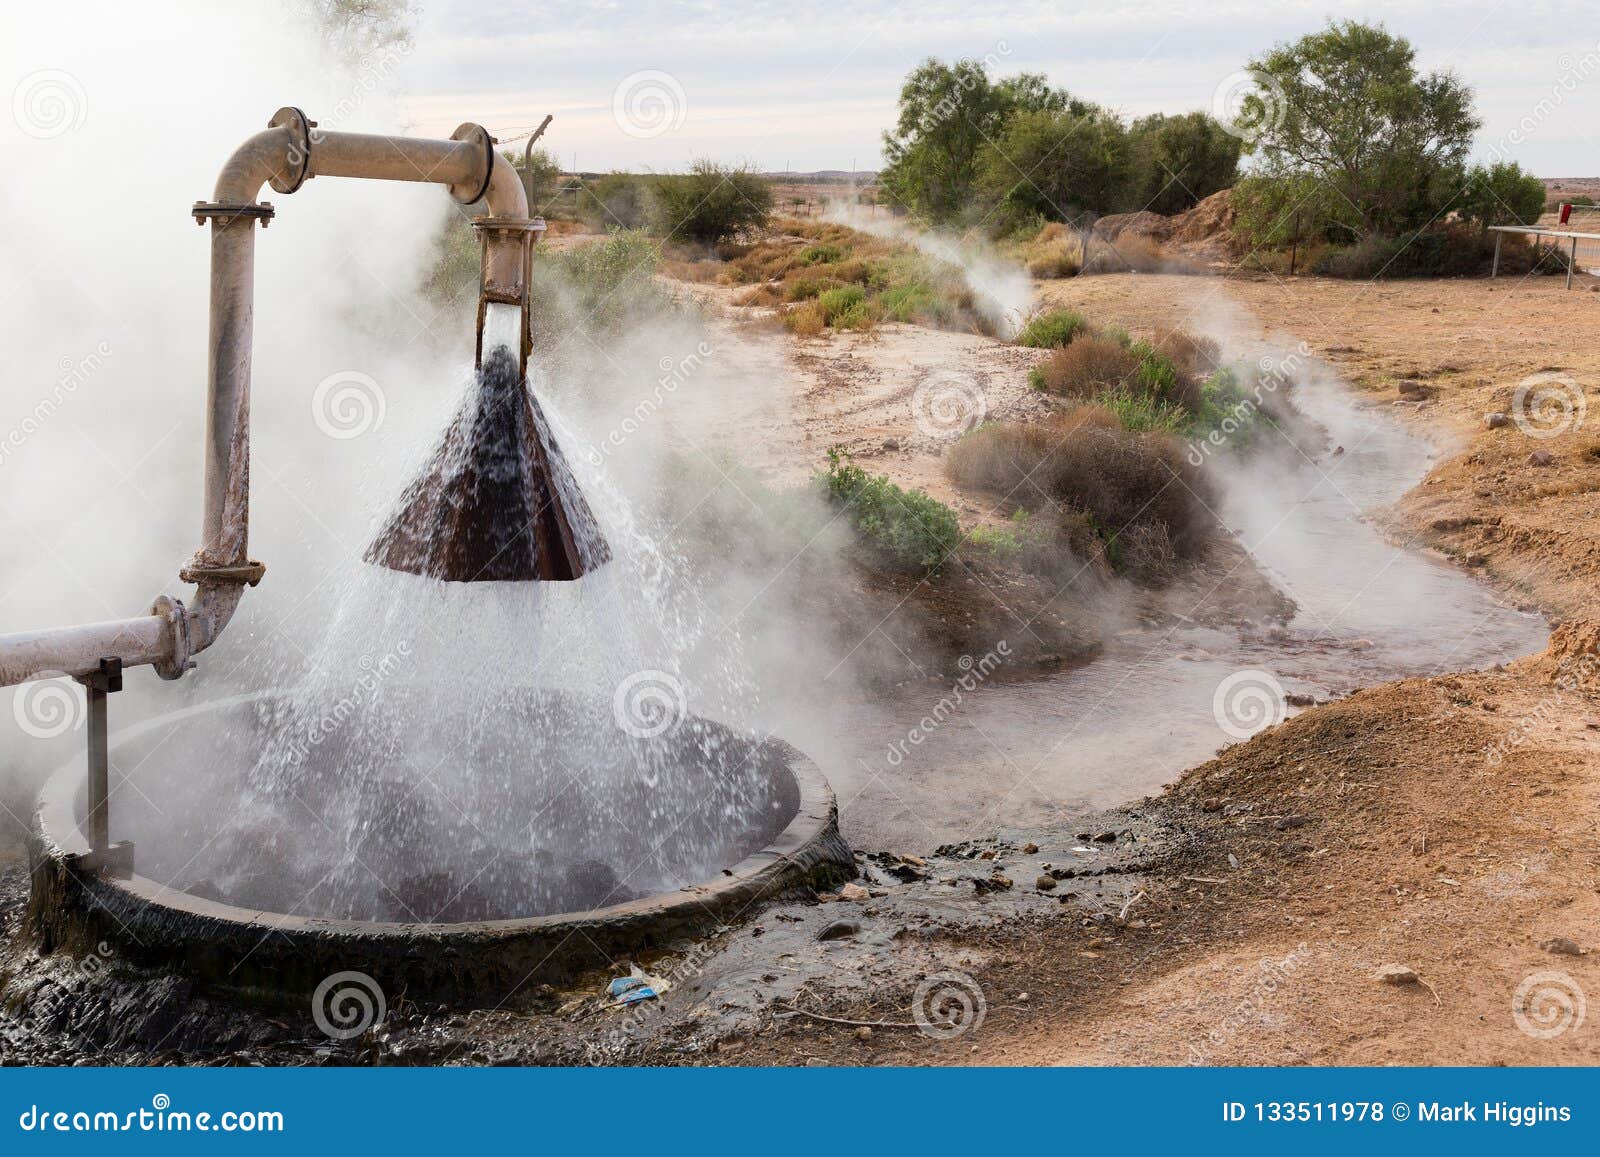 birdsville geothermal hotwater in outback australia